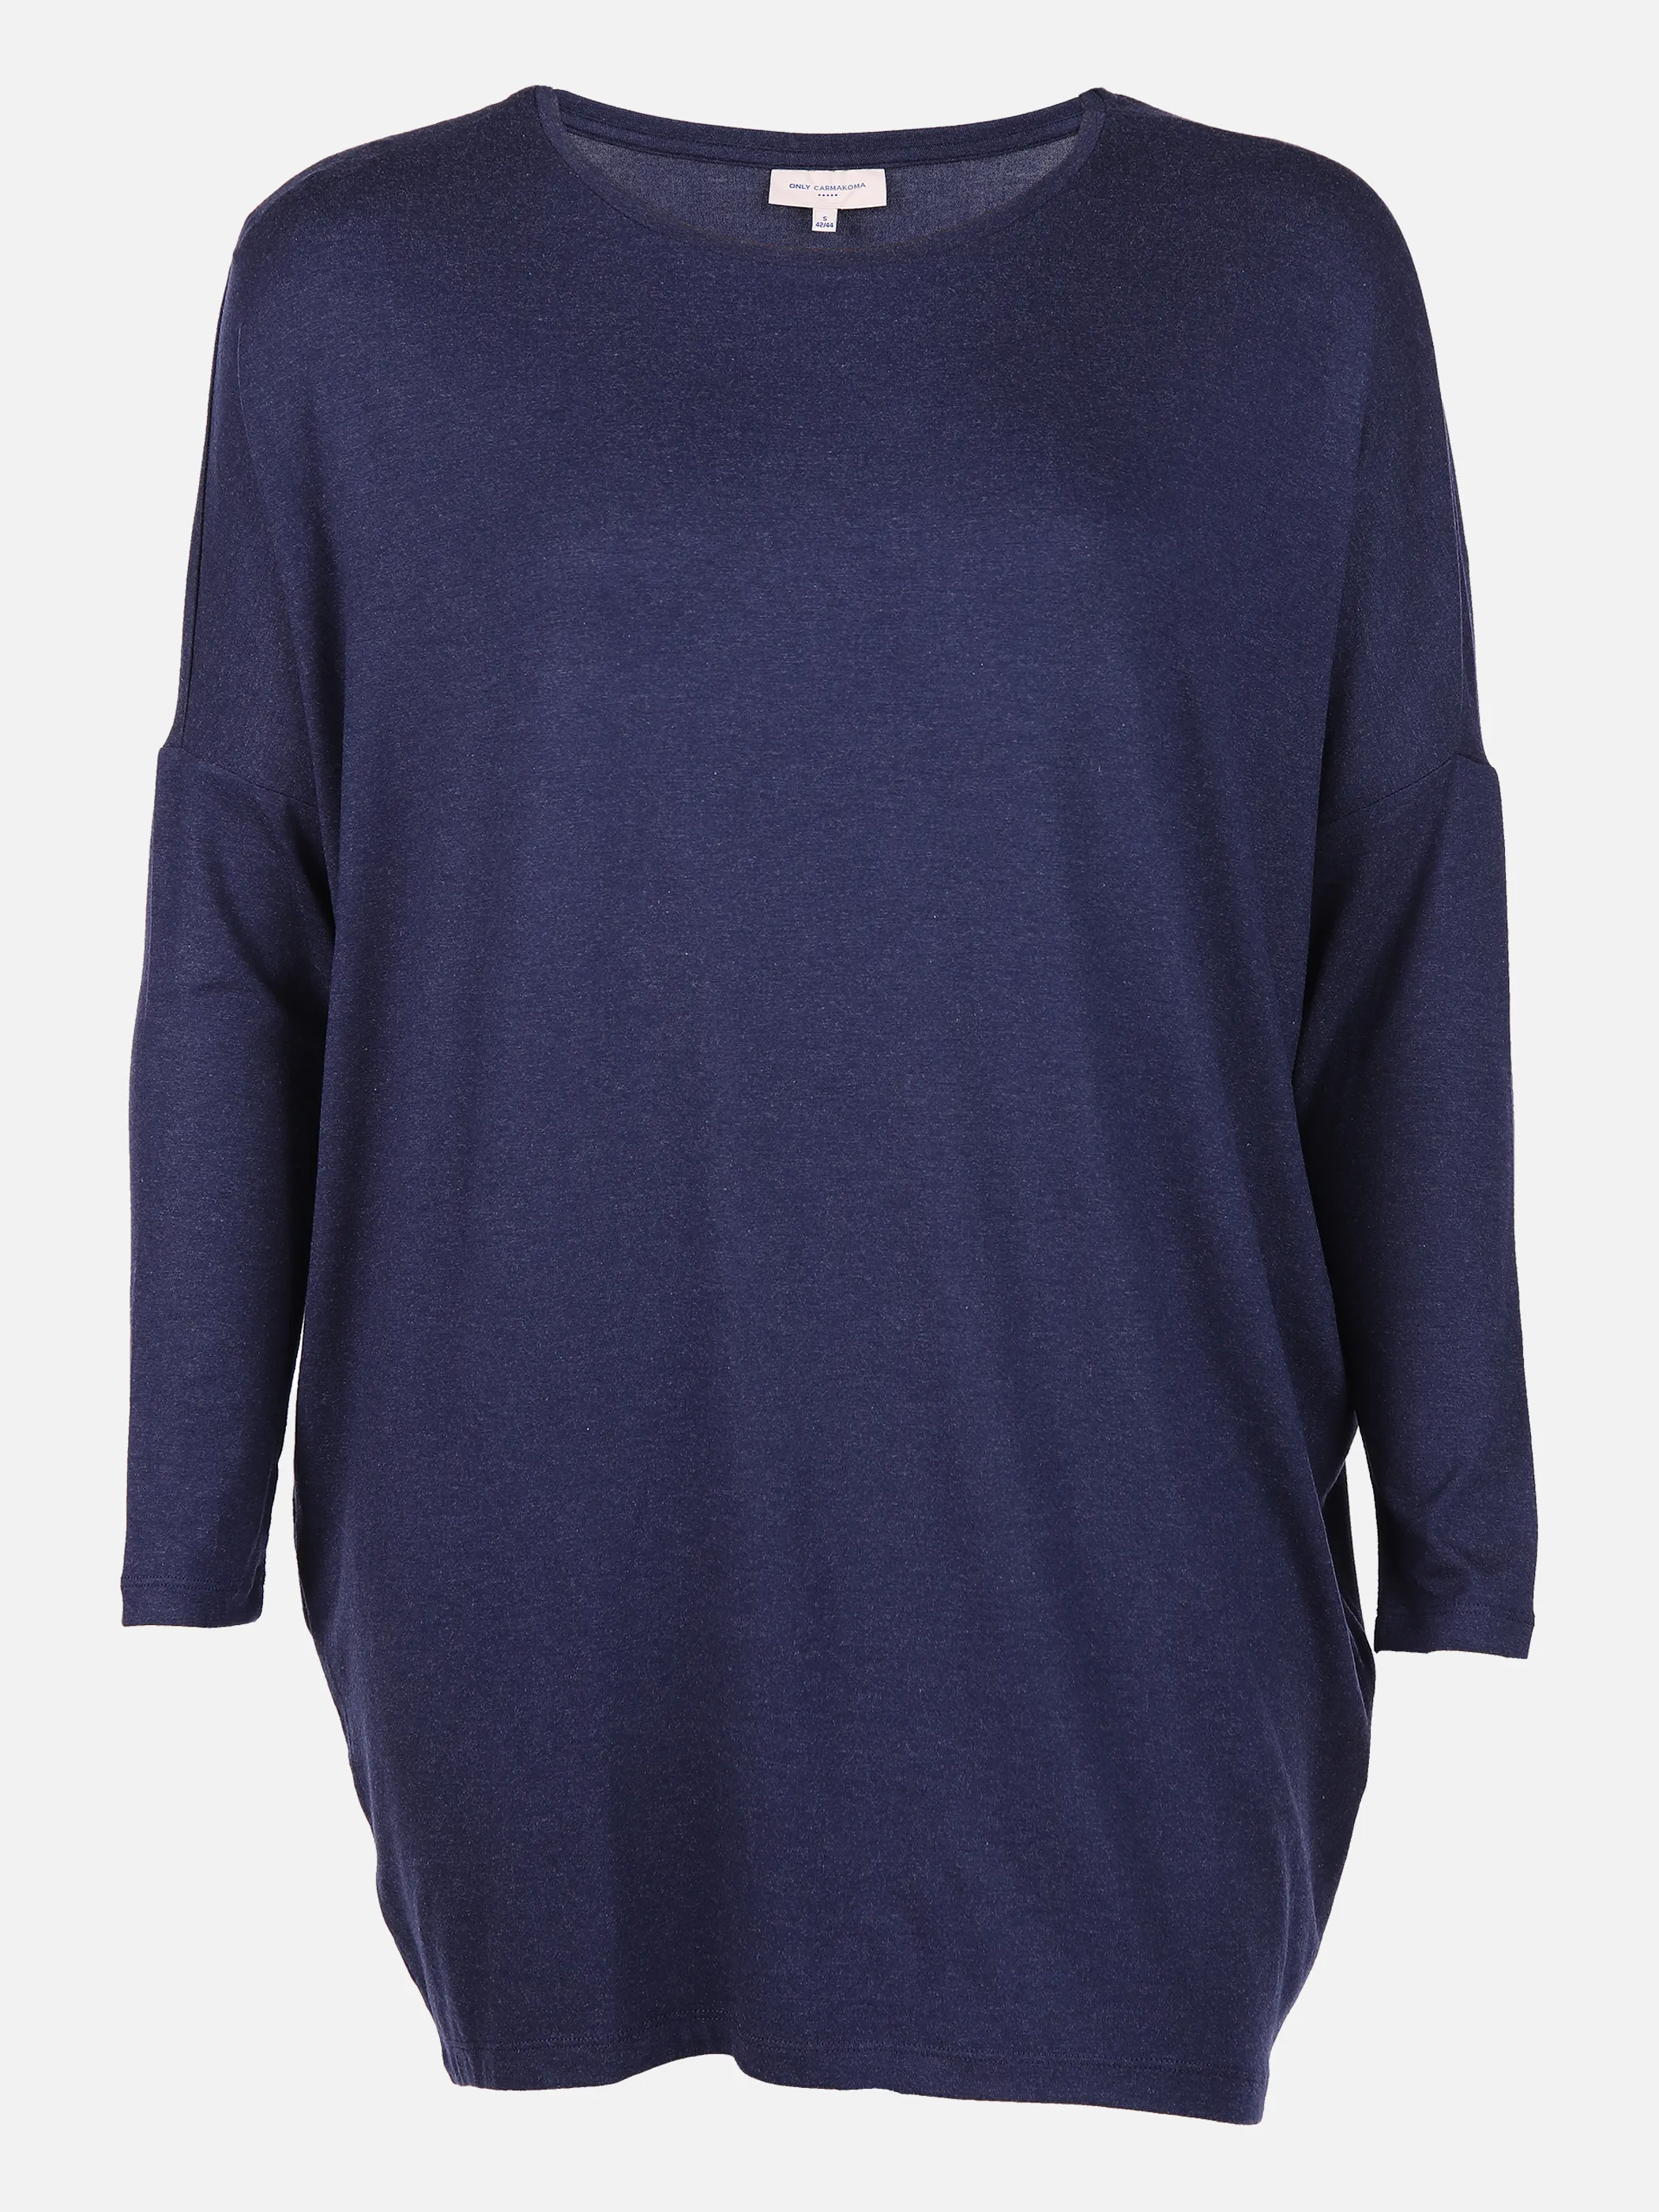 Only Carmacoma CARCARMA L/S LONG TOP Shirt | 185078001 | noSize |  843410-0185078001